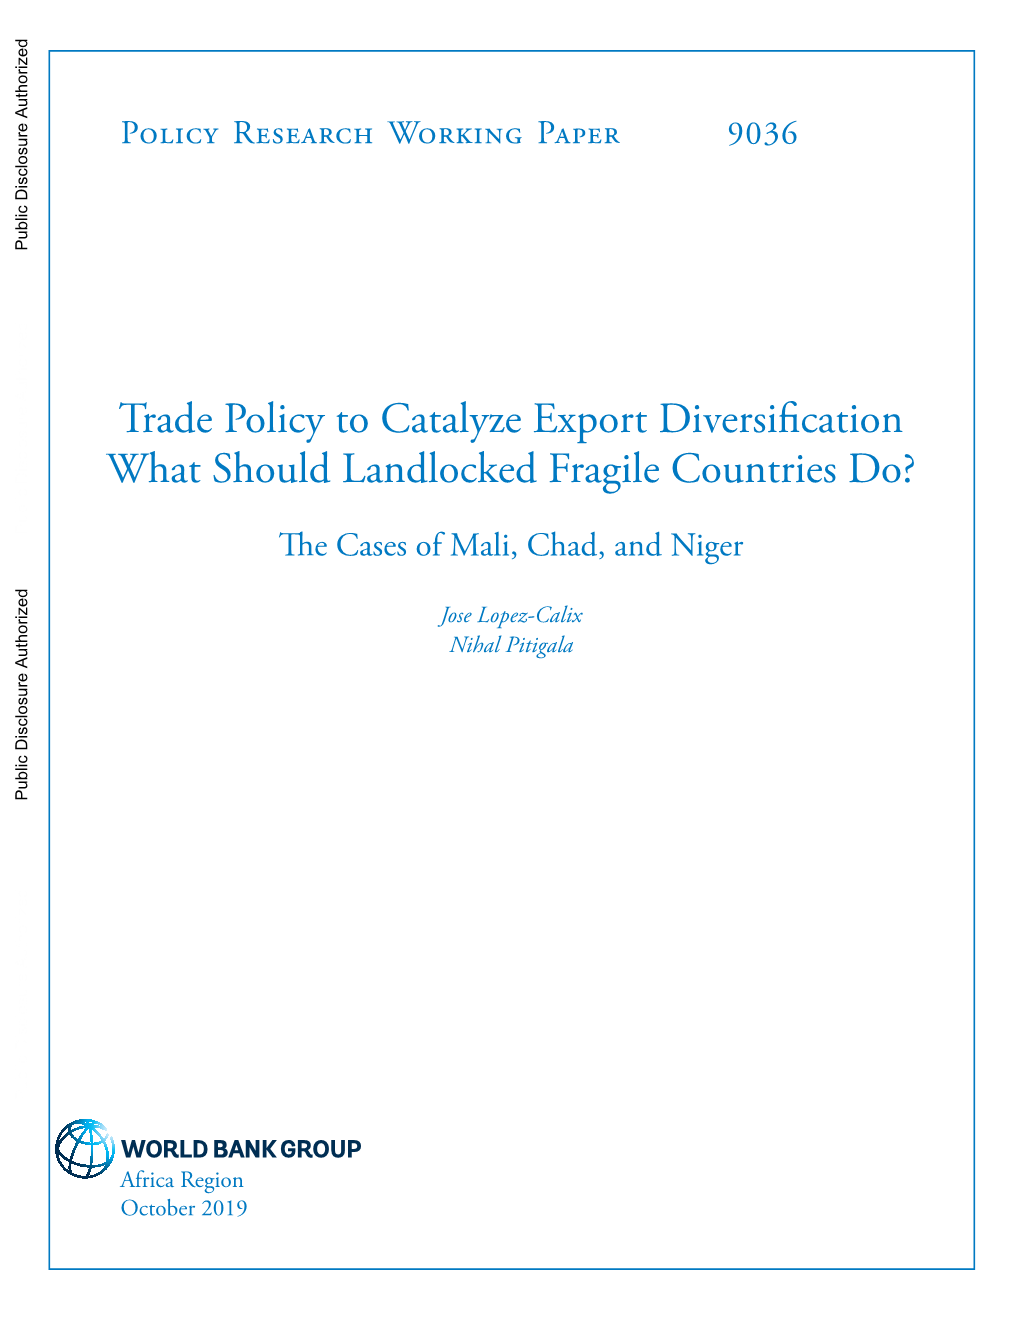 Trade Policy to Catalyze Export Diversification What Should Landlocked Fragile Countries Do?